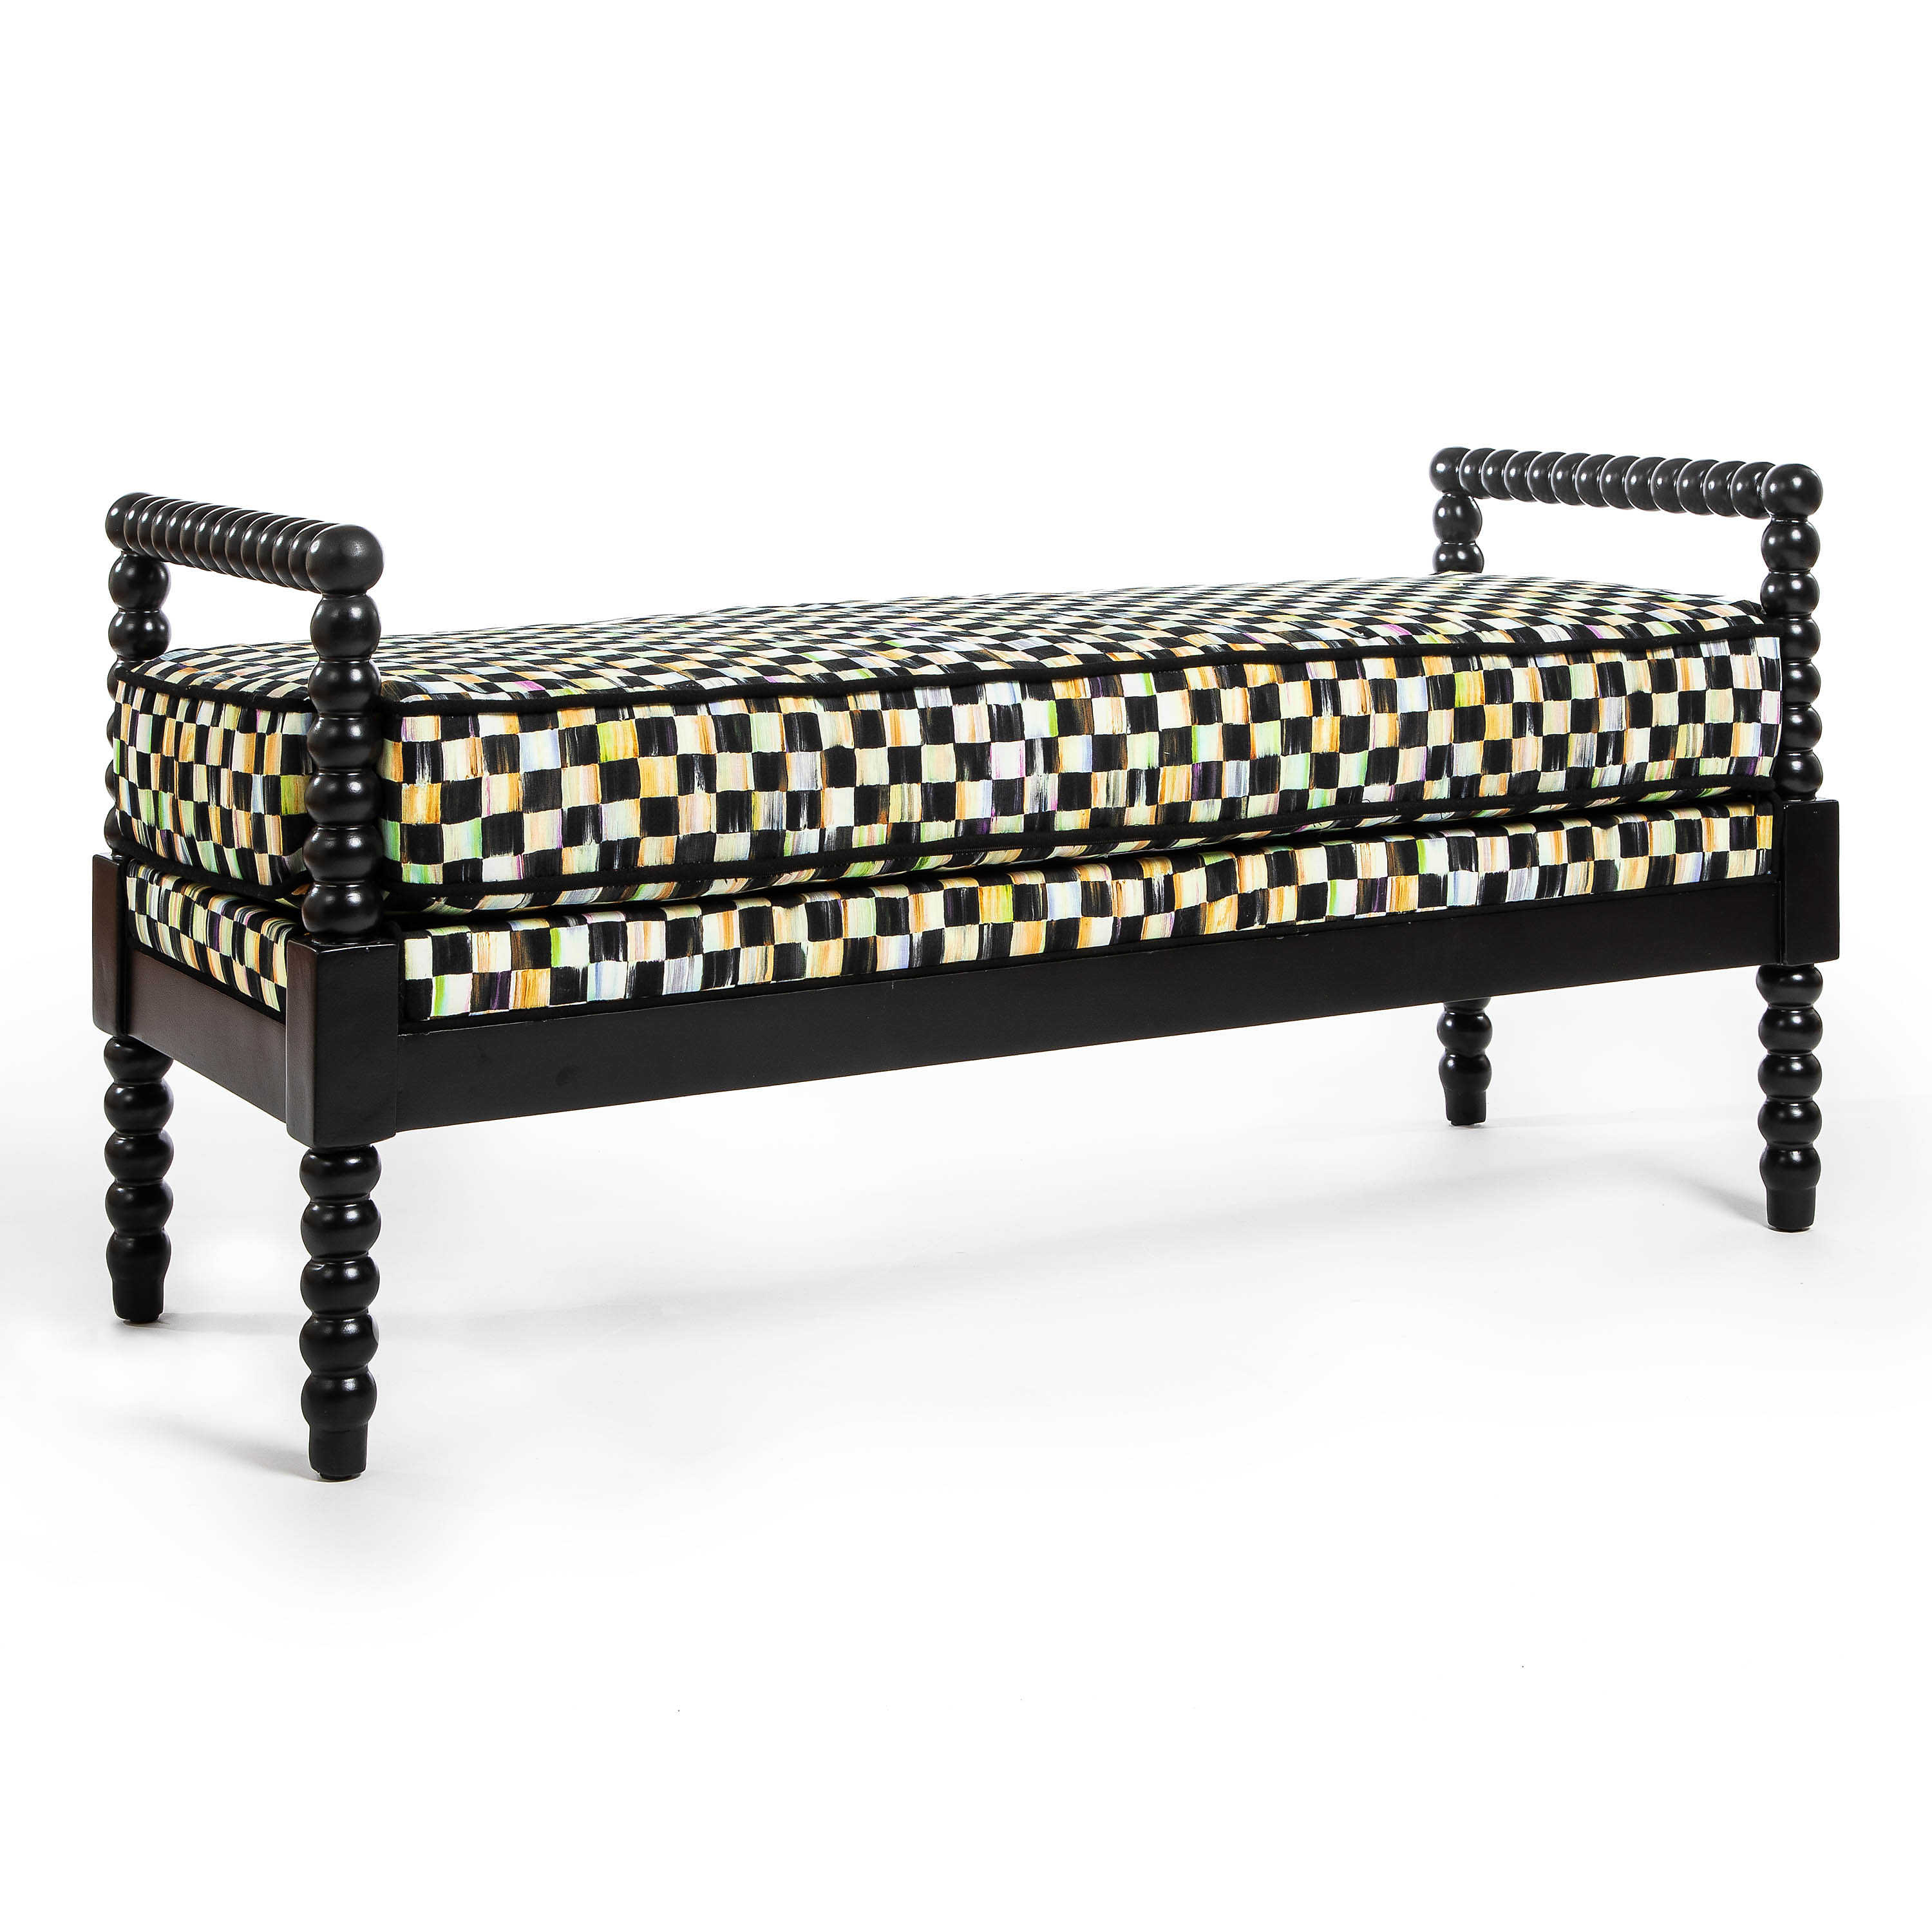 Spindle Check Outdoor Bench mackenzie-childs Panama 0